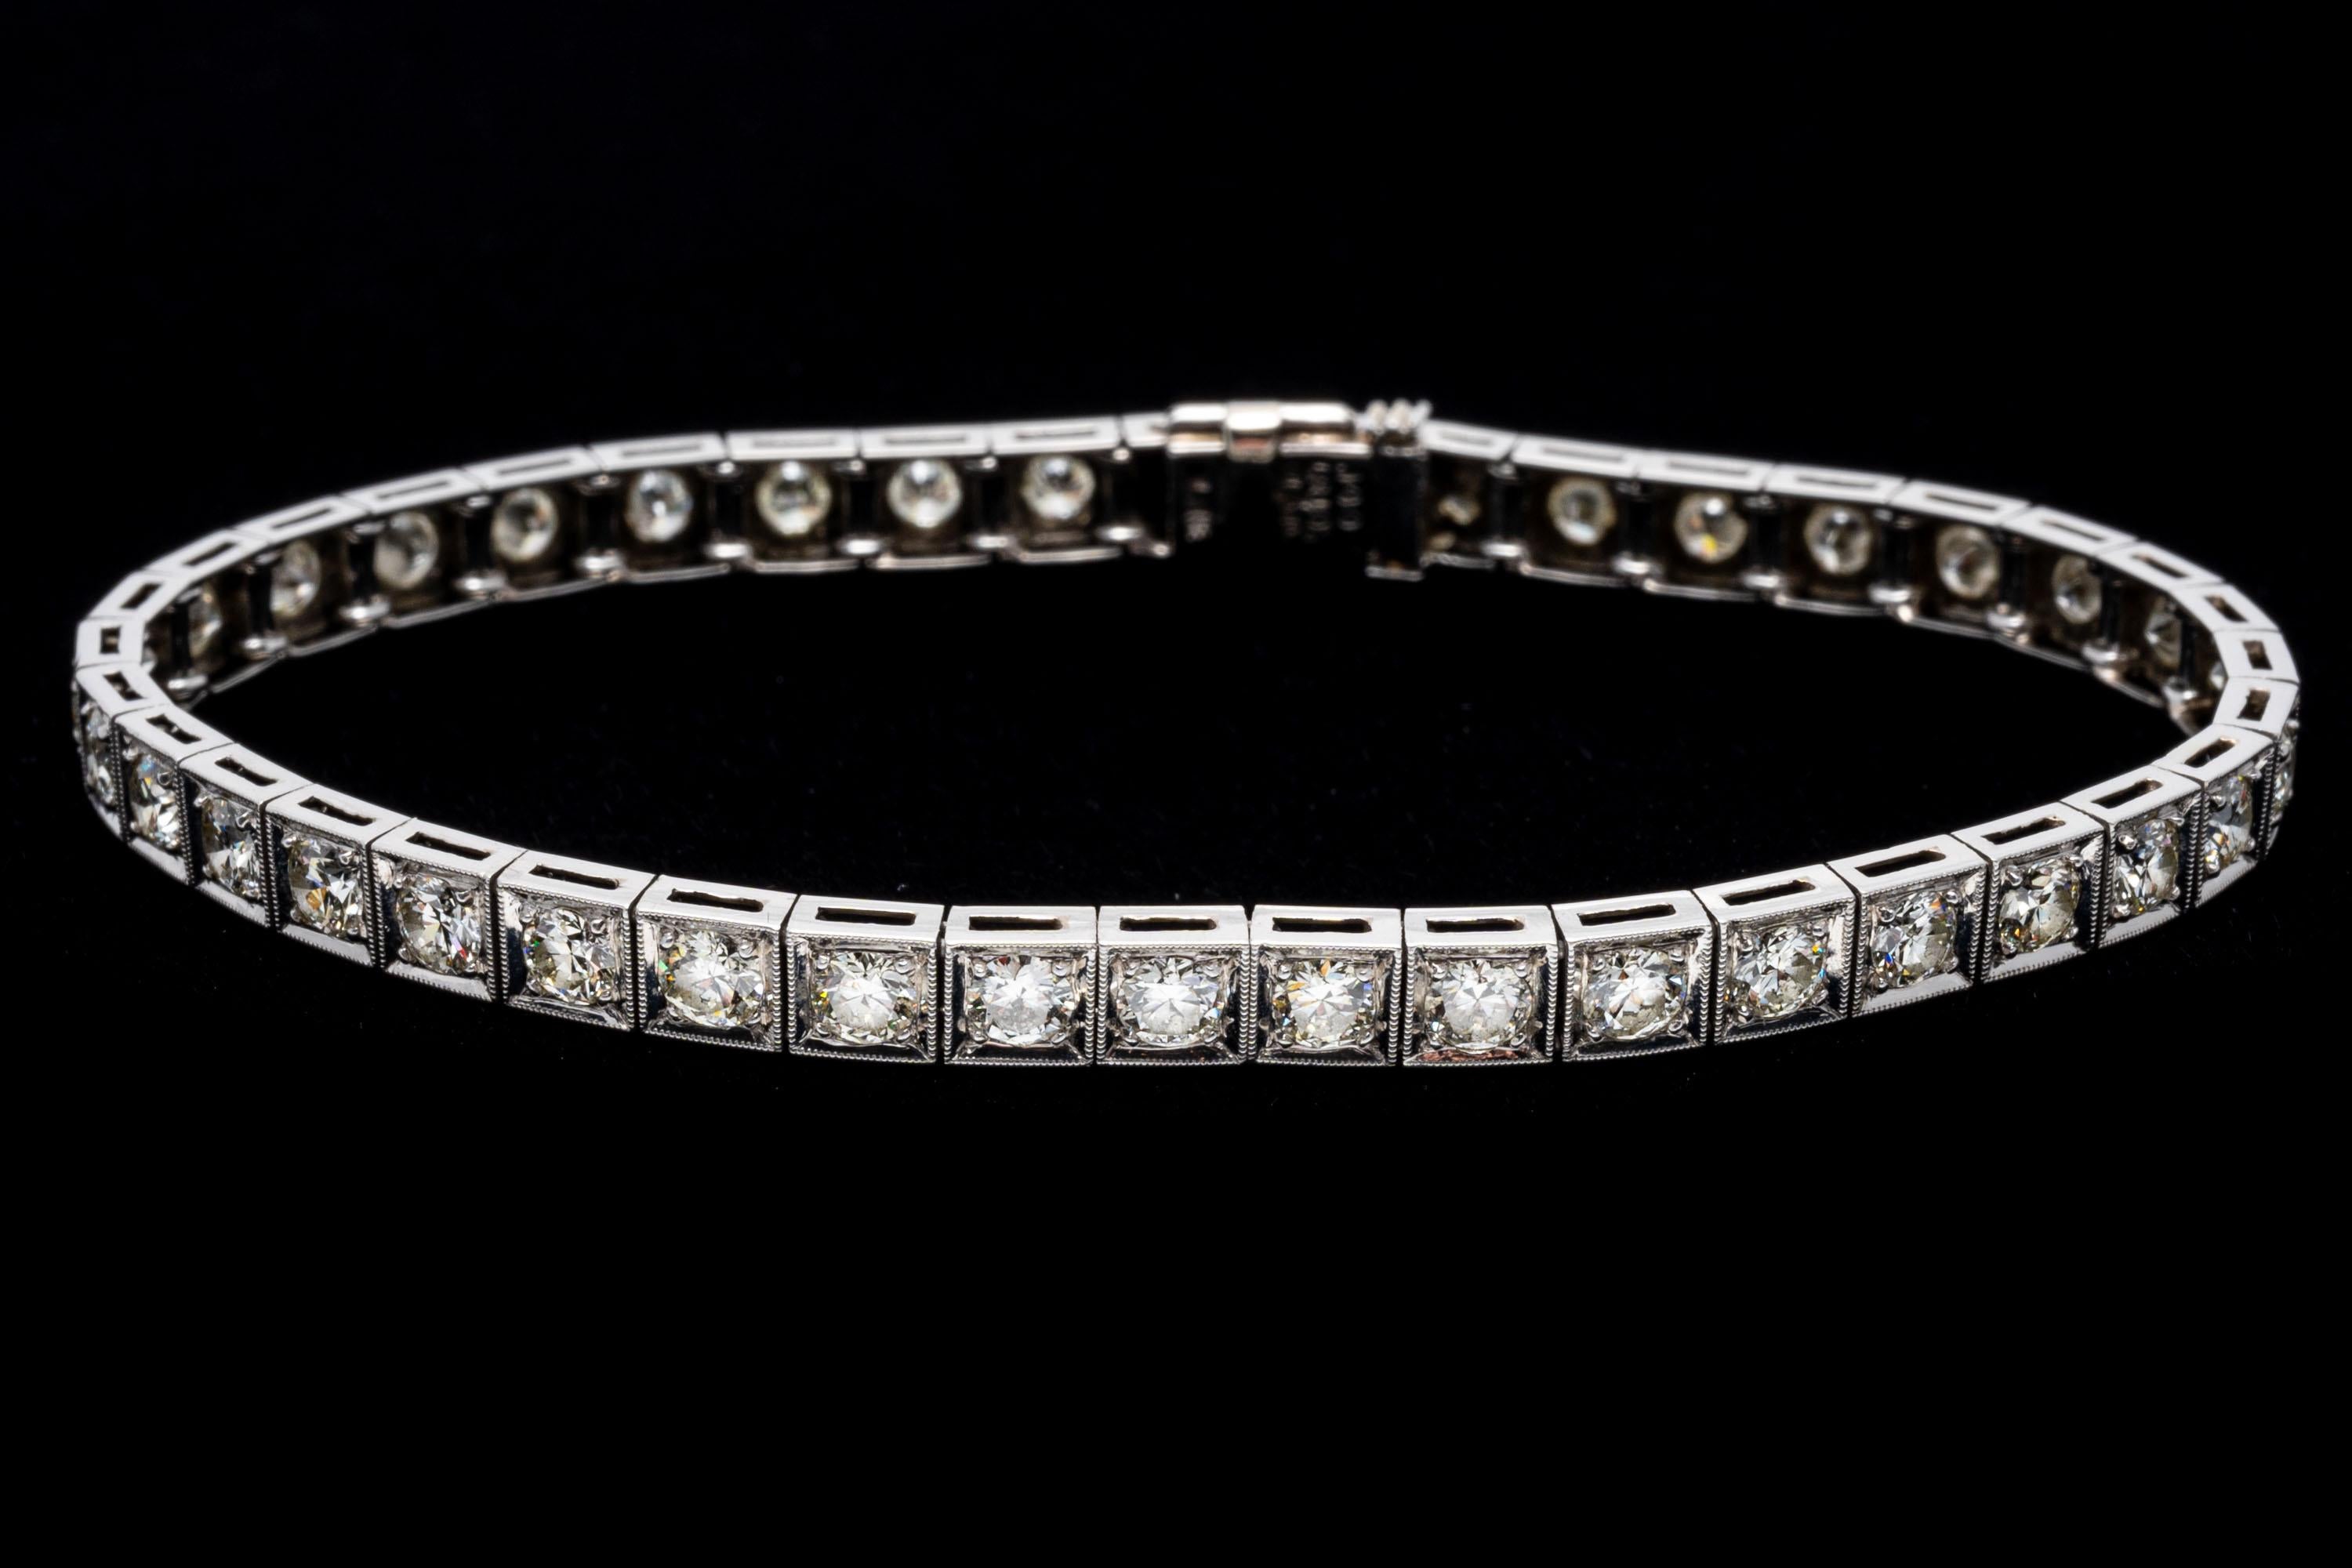 Platinum line bracelet. This marvelous vintage platinum diamond line bracelet features round faceted, European cut diamonds, approximately 3.72 TCW, ranging in clarity from VS2 to Si2, and are J to K color. The stones are prong set into square